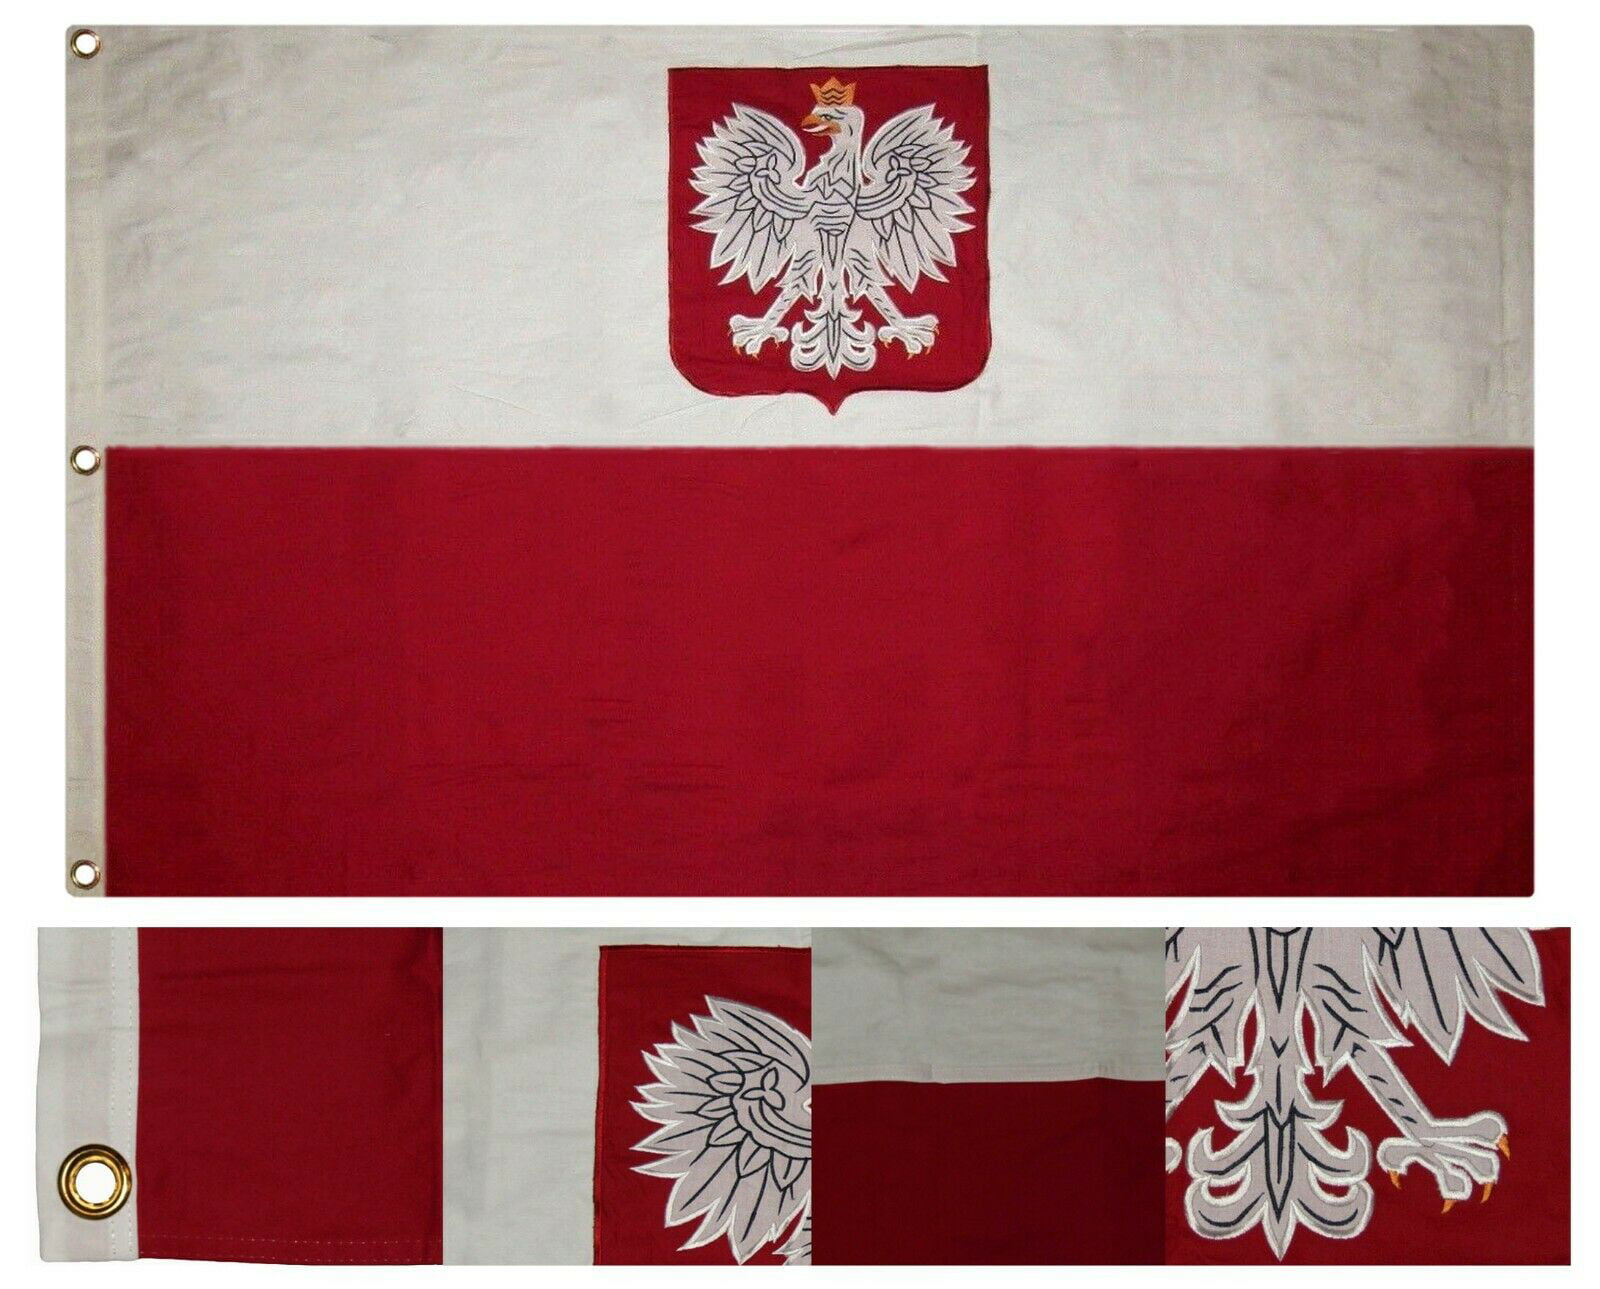 3x5 St George's Cross 100% Cotton Premium Embroidered Flag 3'x5' 3 Clips 